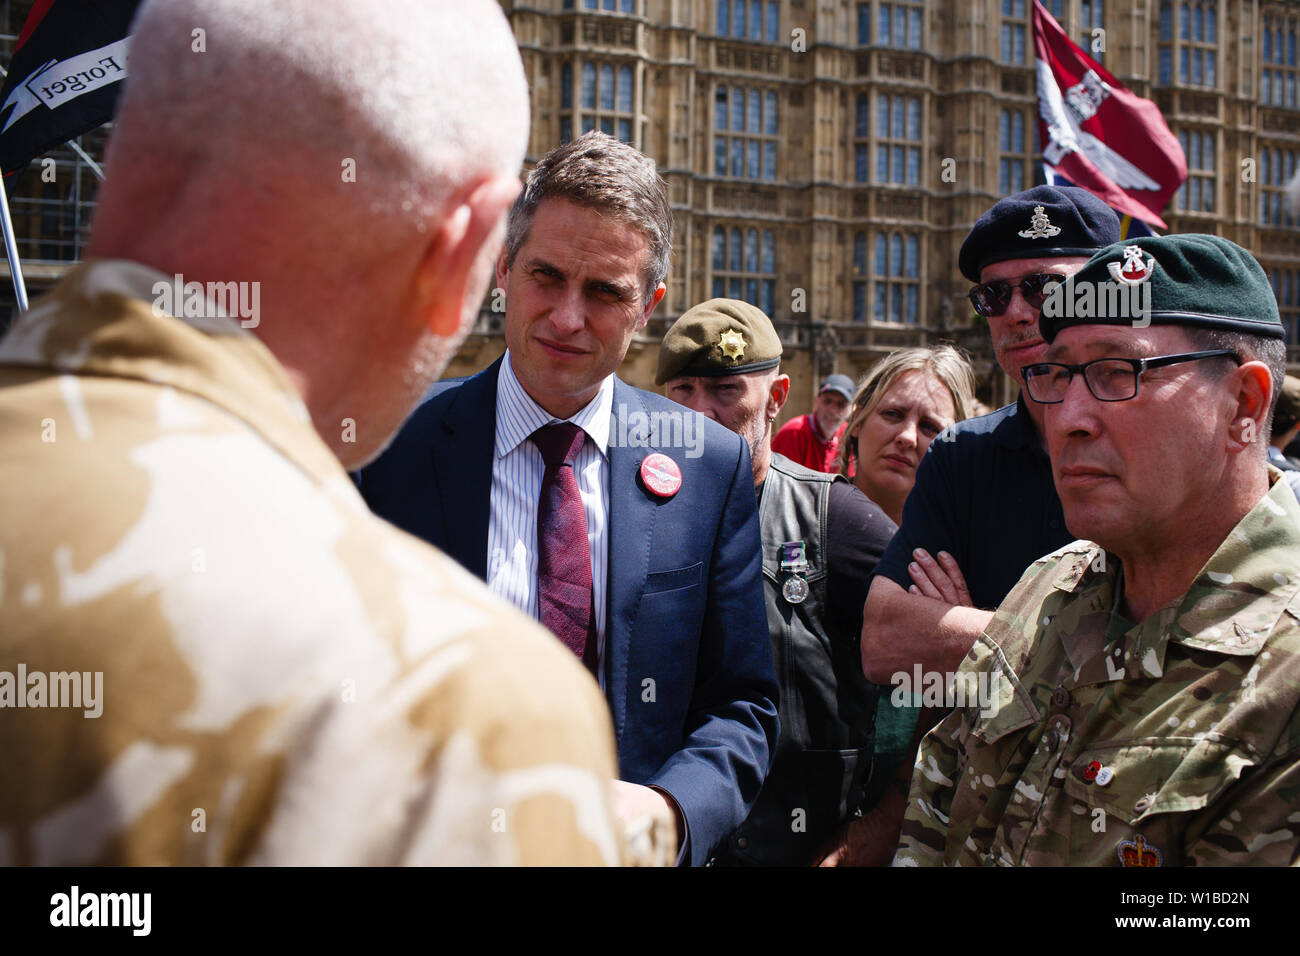 Britain's former Secretary of State for Defence Gavin Williamson speaks with veterans protesting the prosecution of former British soldiers for wartime killings at a demonstration outside the Houses of Parliament. The demonstration centred on the ongoing case of the as-yet-unnamed 'Soldier F', charged with two counts of murder for killings on Bloody Sunday in Londonderry, Northern Ireland, in 1972. Stock Photo